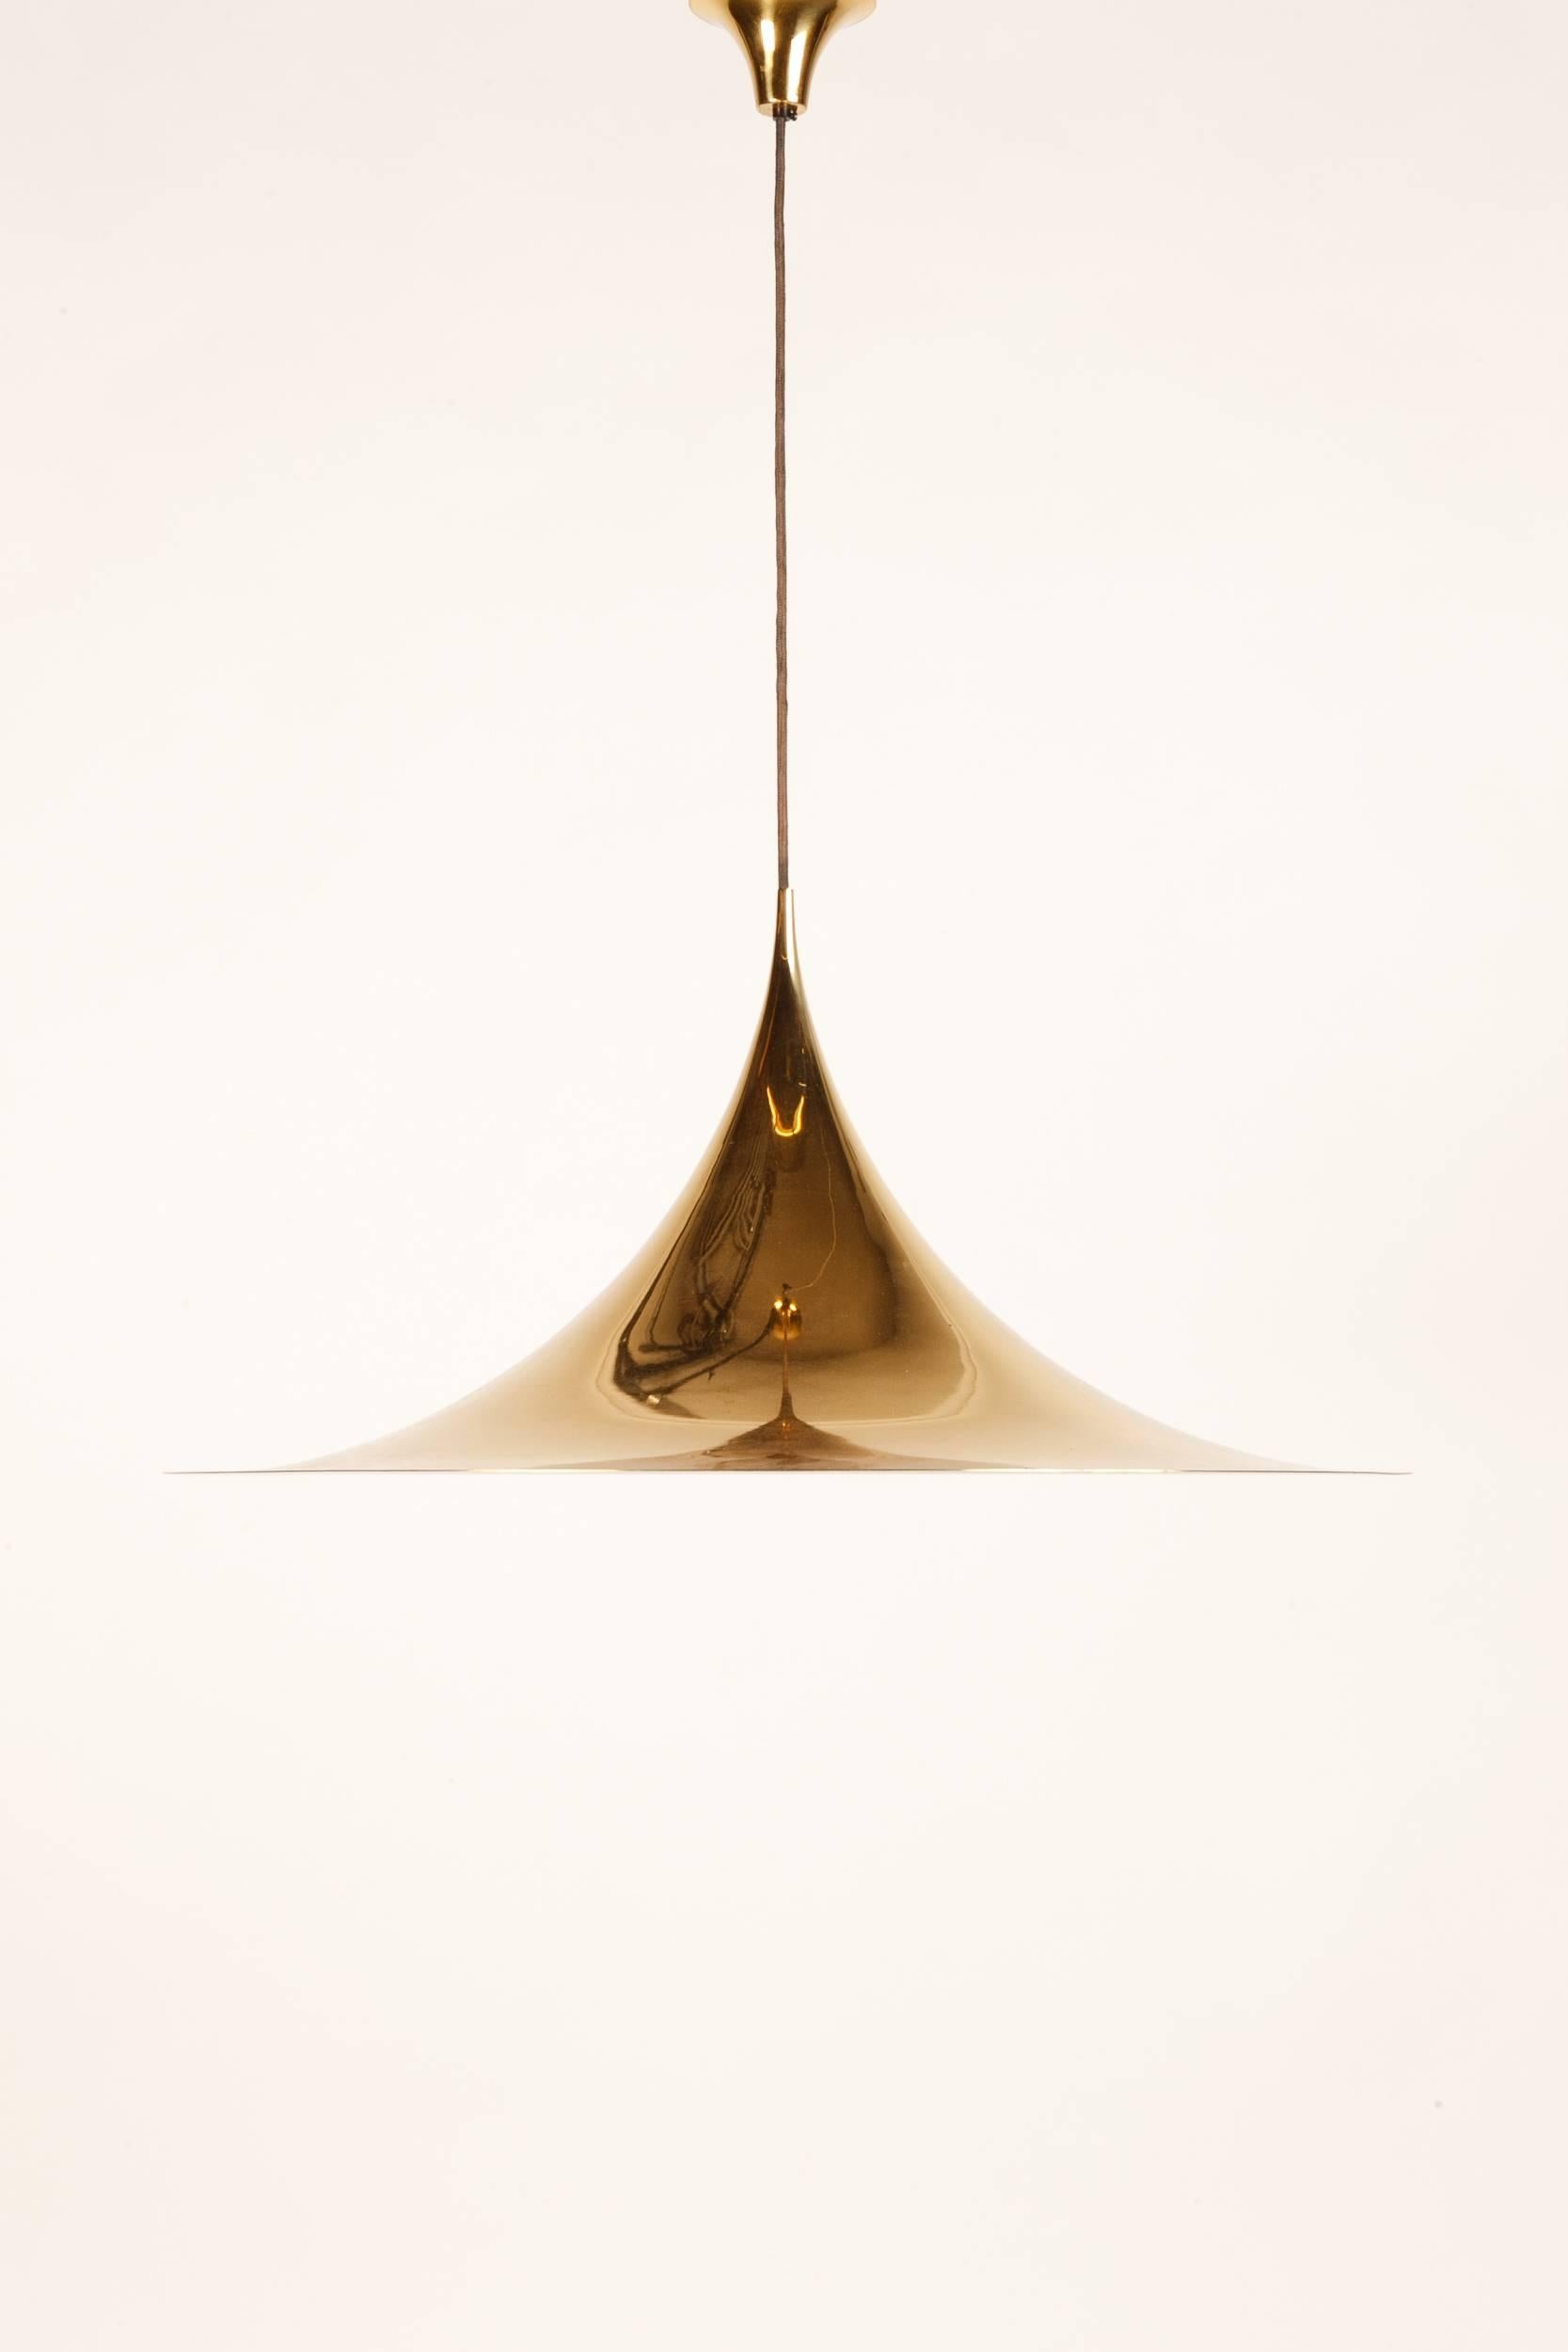 Extra large Semi Pendant lamp by Fog & Mørup, manufactured in Denmark in the 1970's. Here the luxury version in 24ct gold plated metal with a diameter of 70cm! Fabric wire and the original matching canopy.